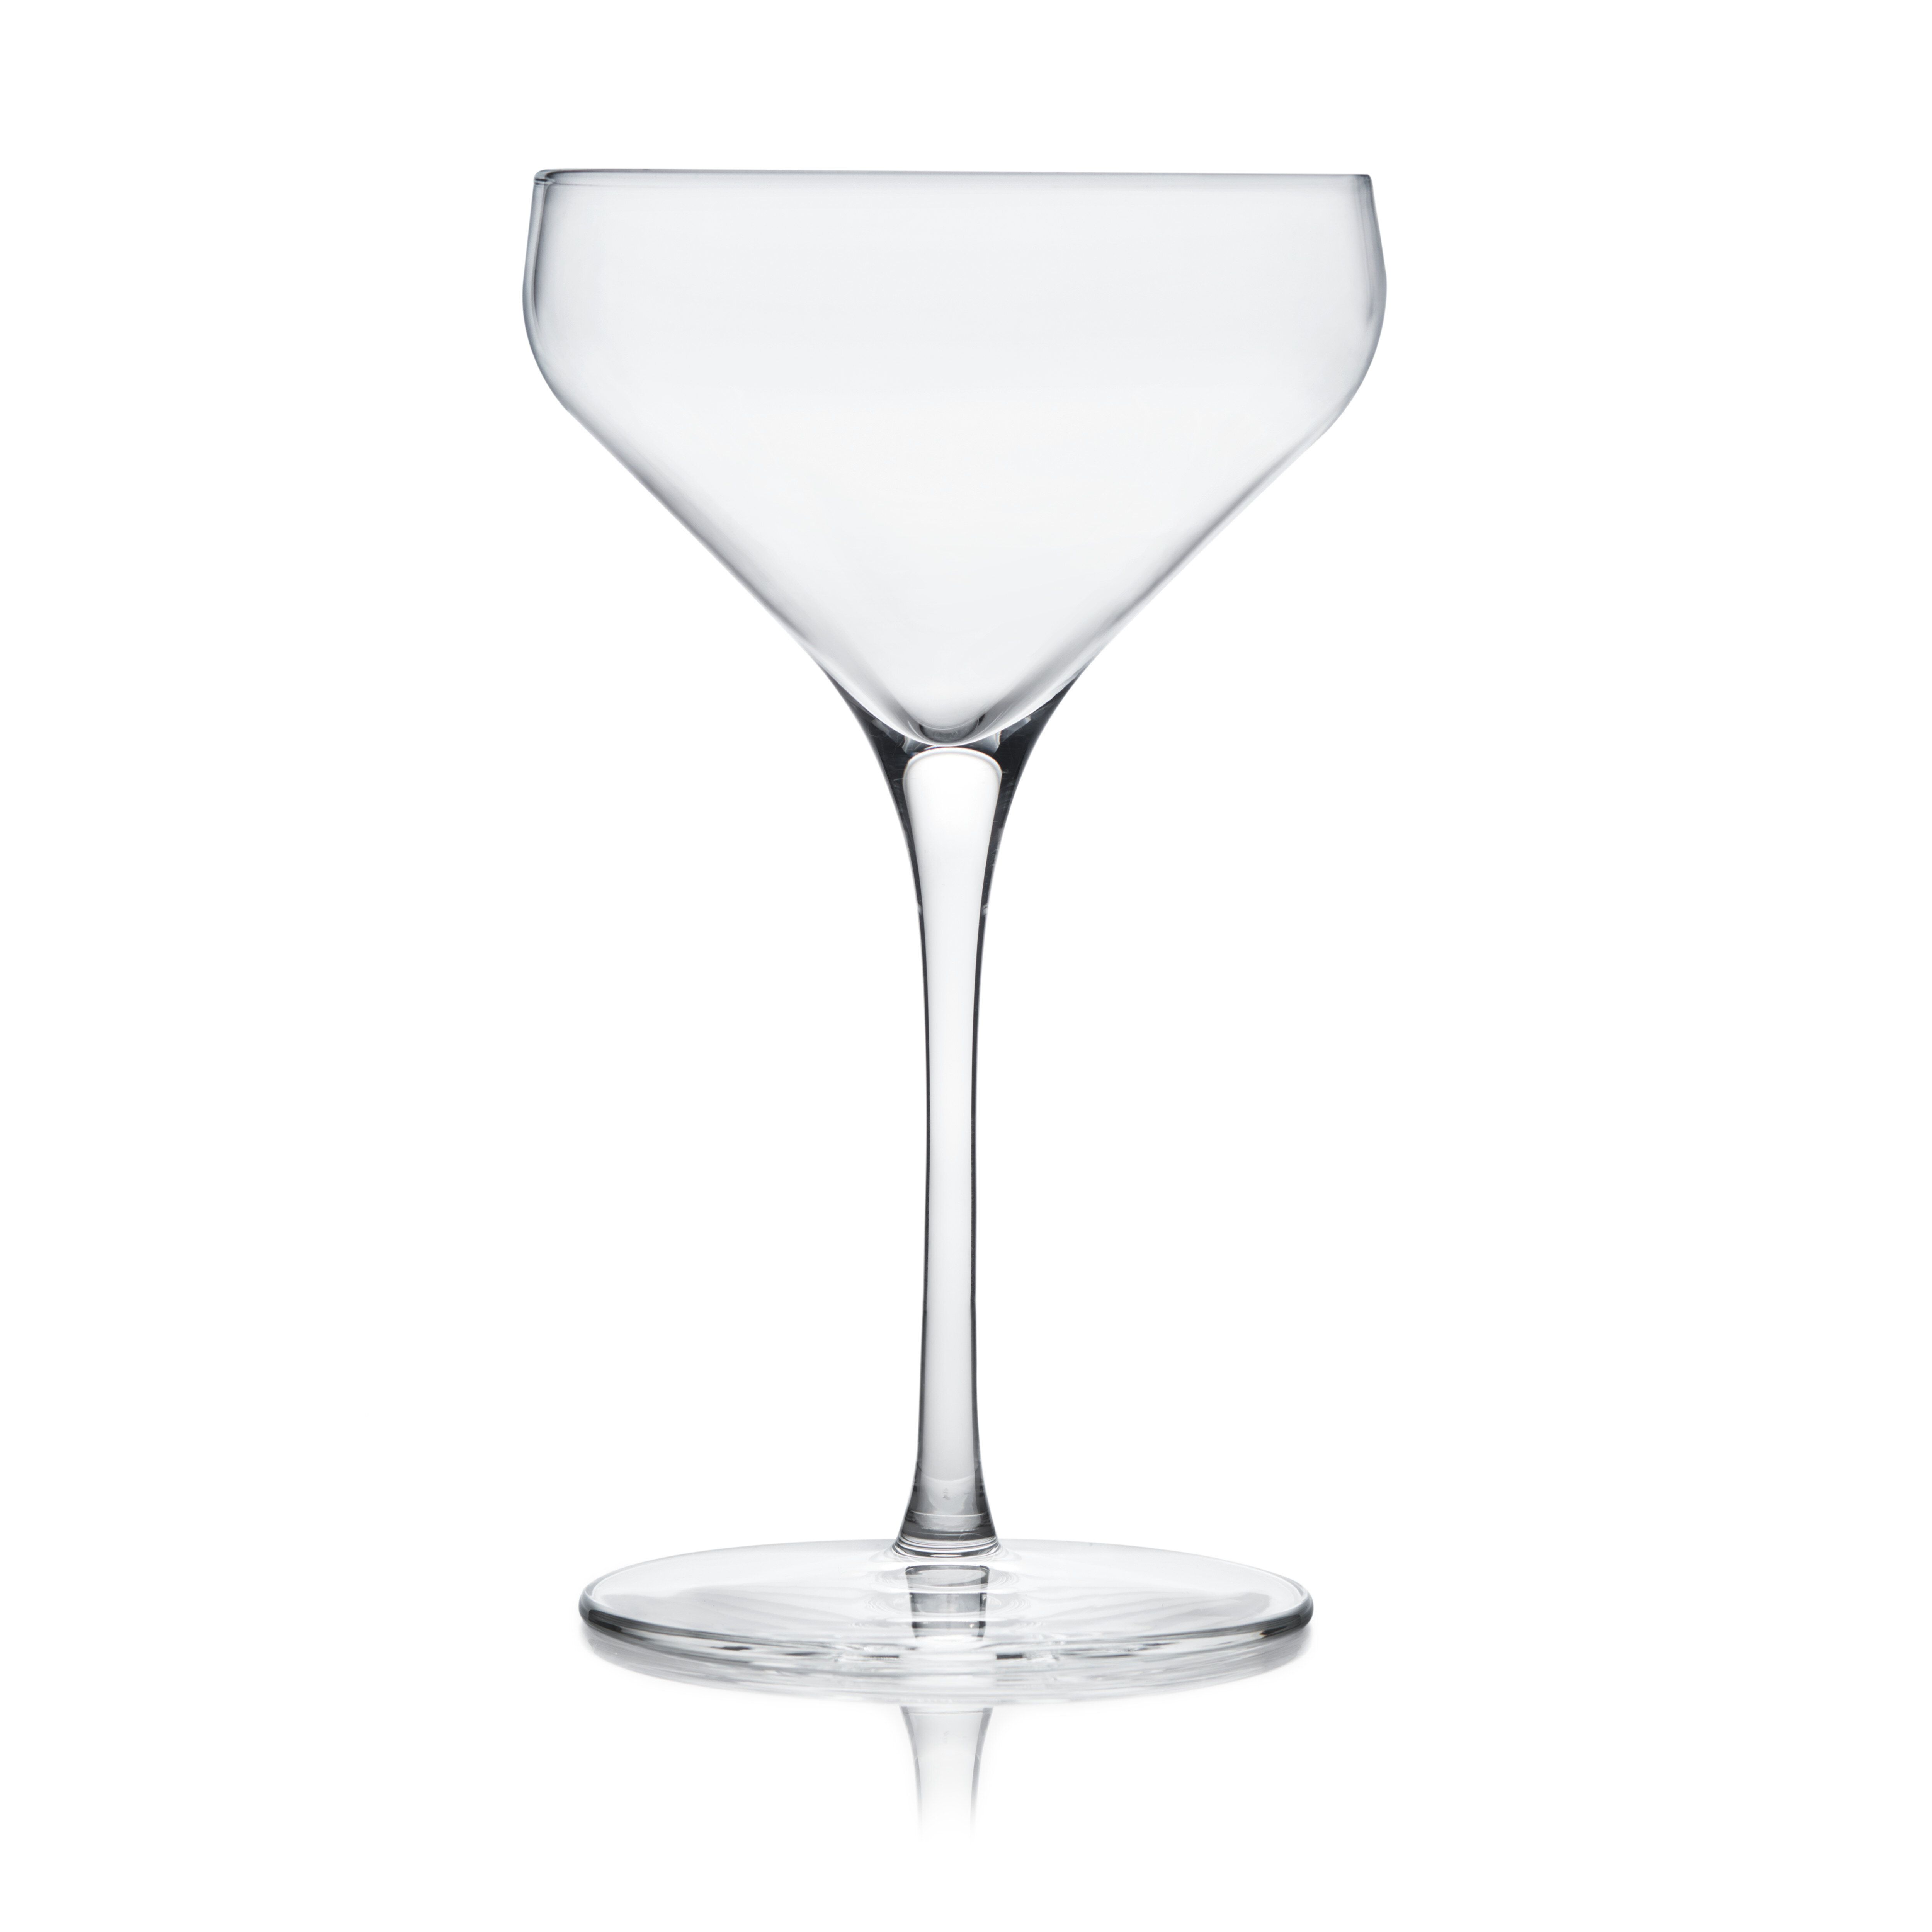 Libbey Signature Greenwich Coupe Cocktail Glasses (Set of 4)